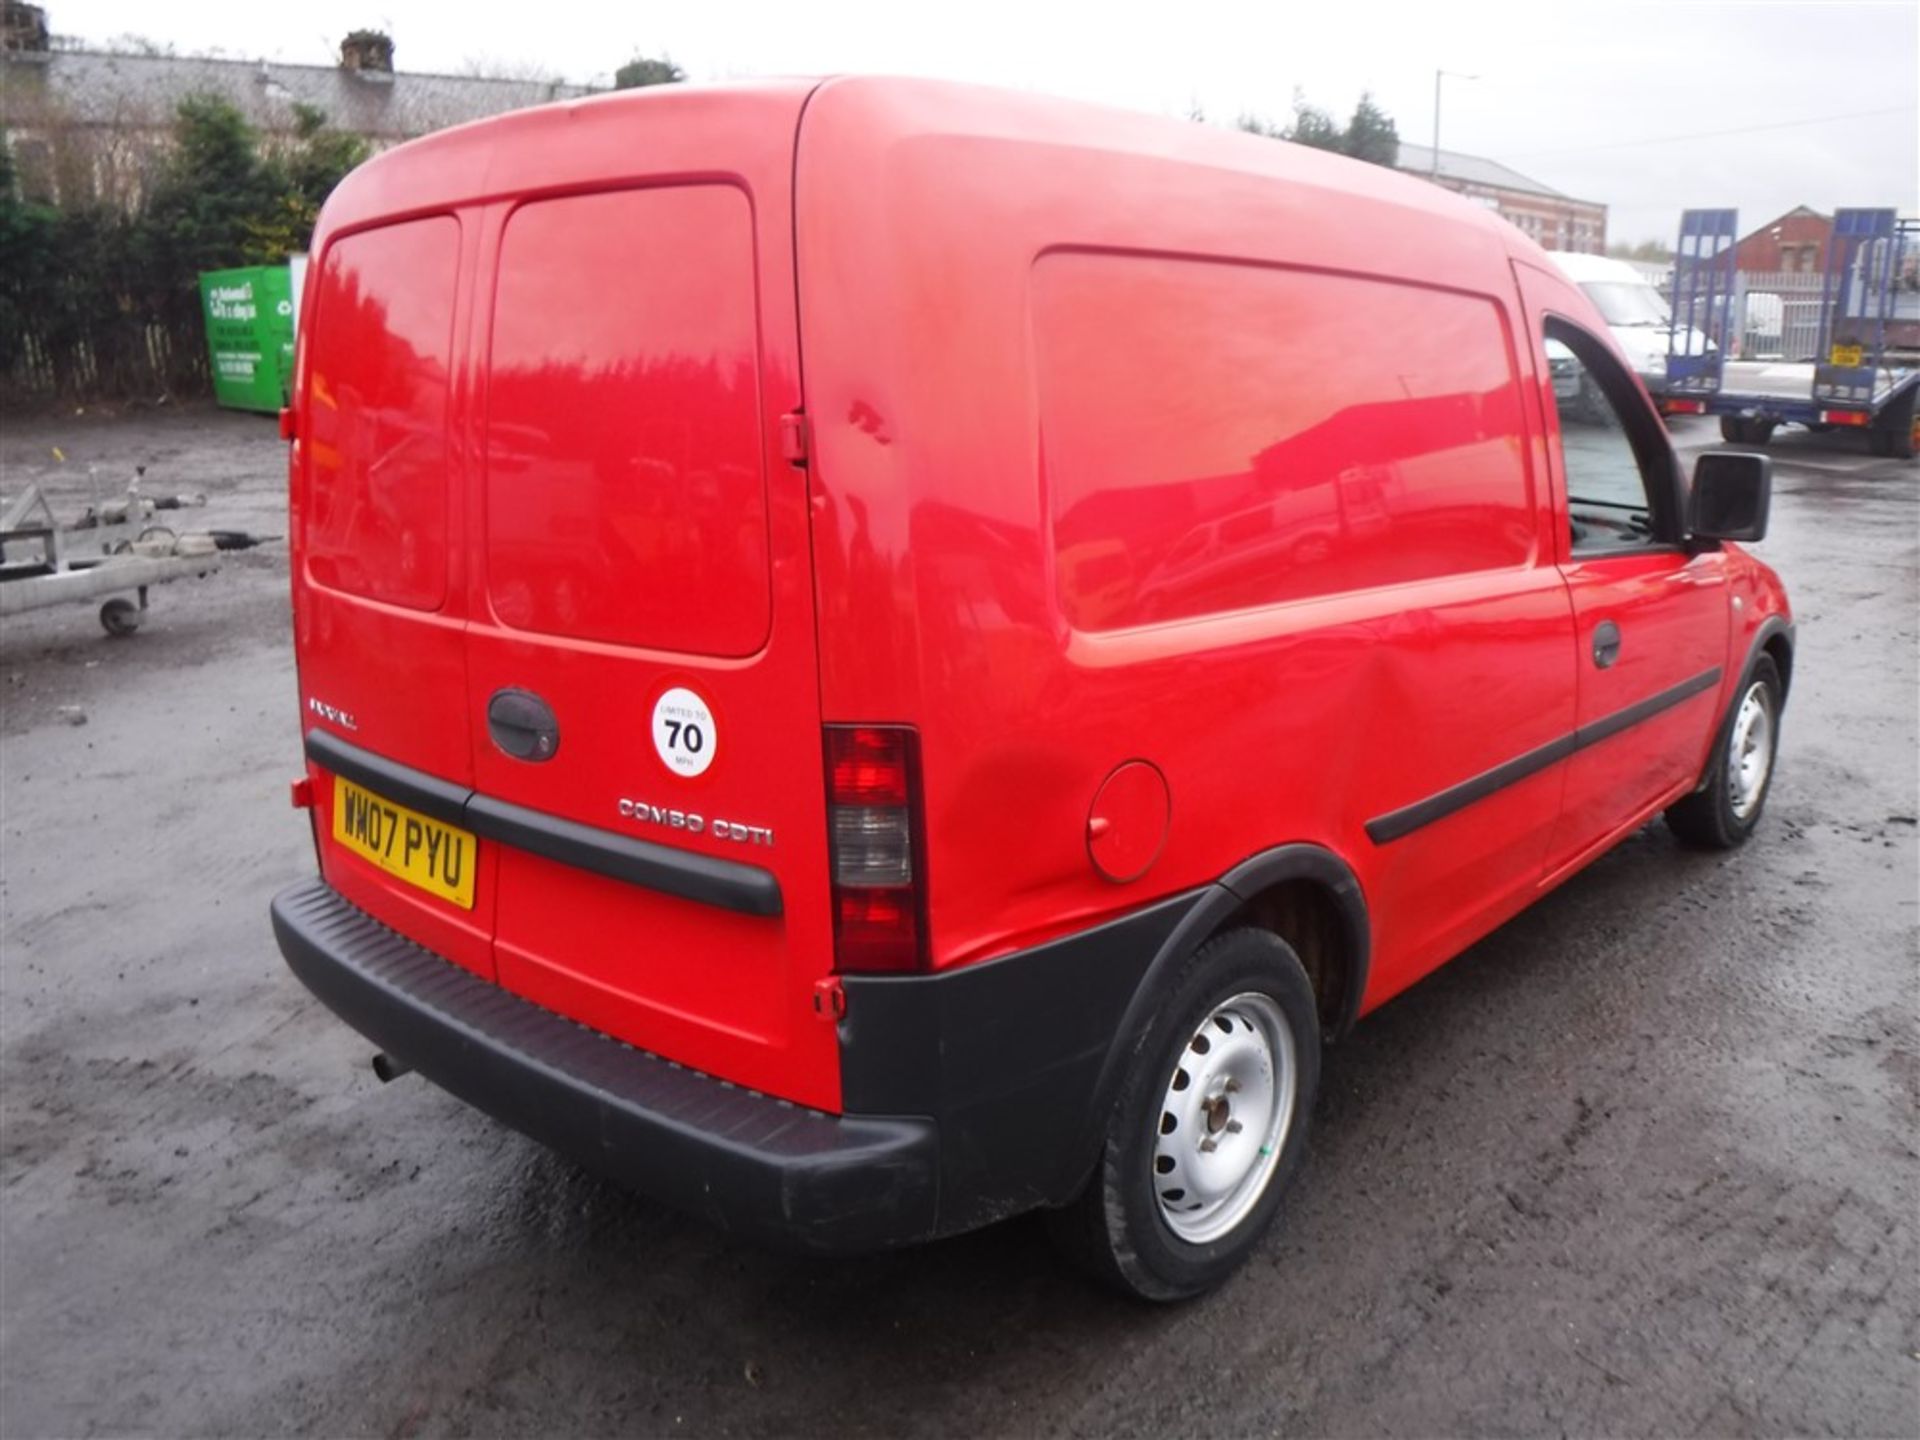 07 reg VAUXHALL COMBO 1700 CDTI VAN, 1ST REG 07/07, 130946M WARRANTED, V5 HERE, 1 OWNER FROM - Image 4 of 5